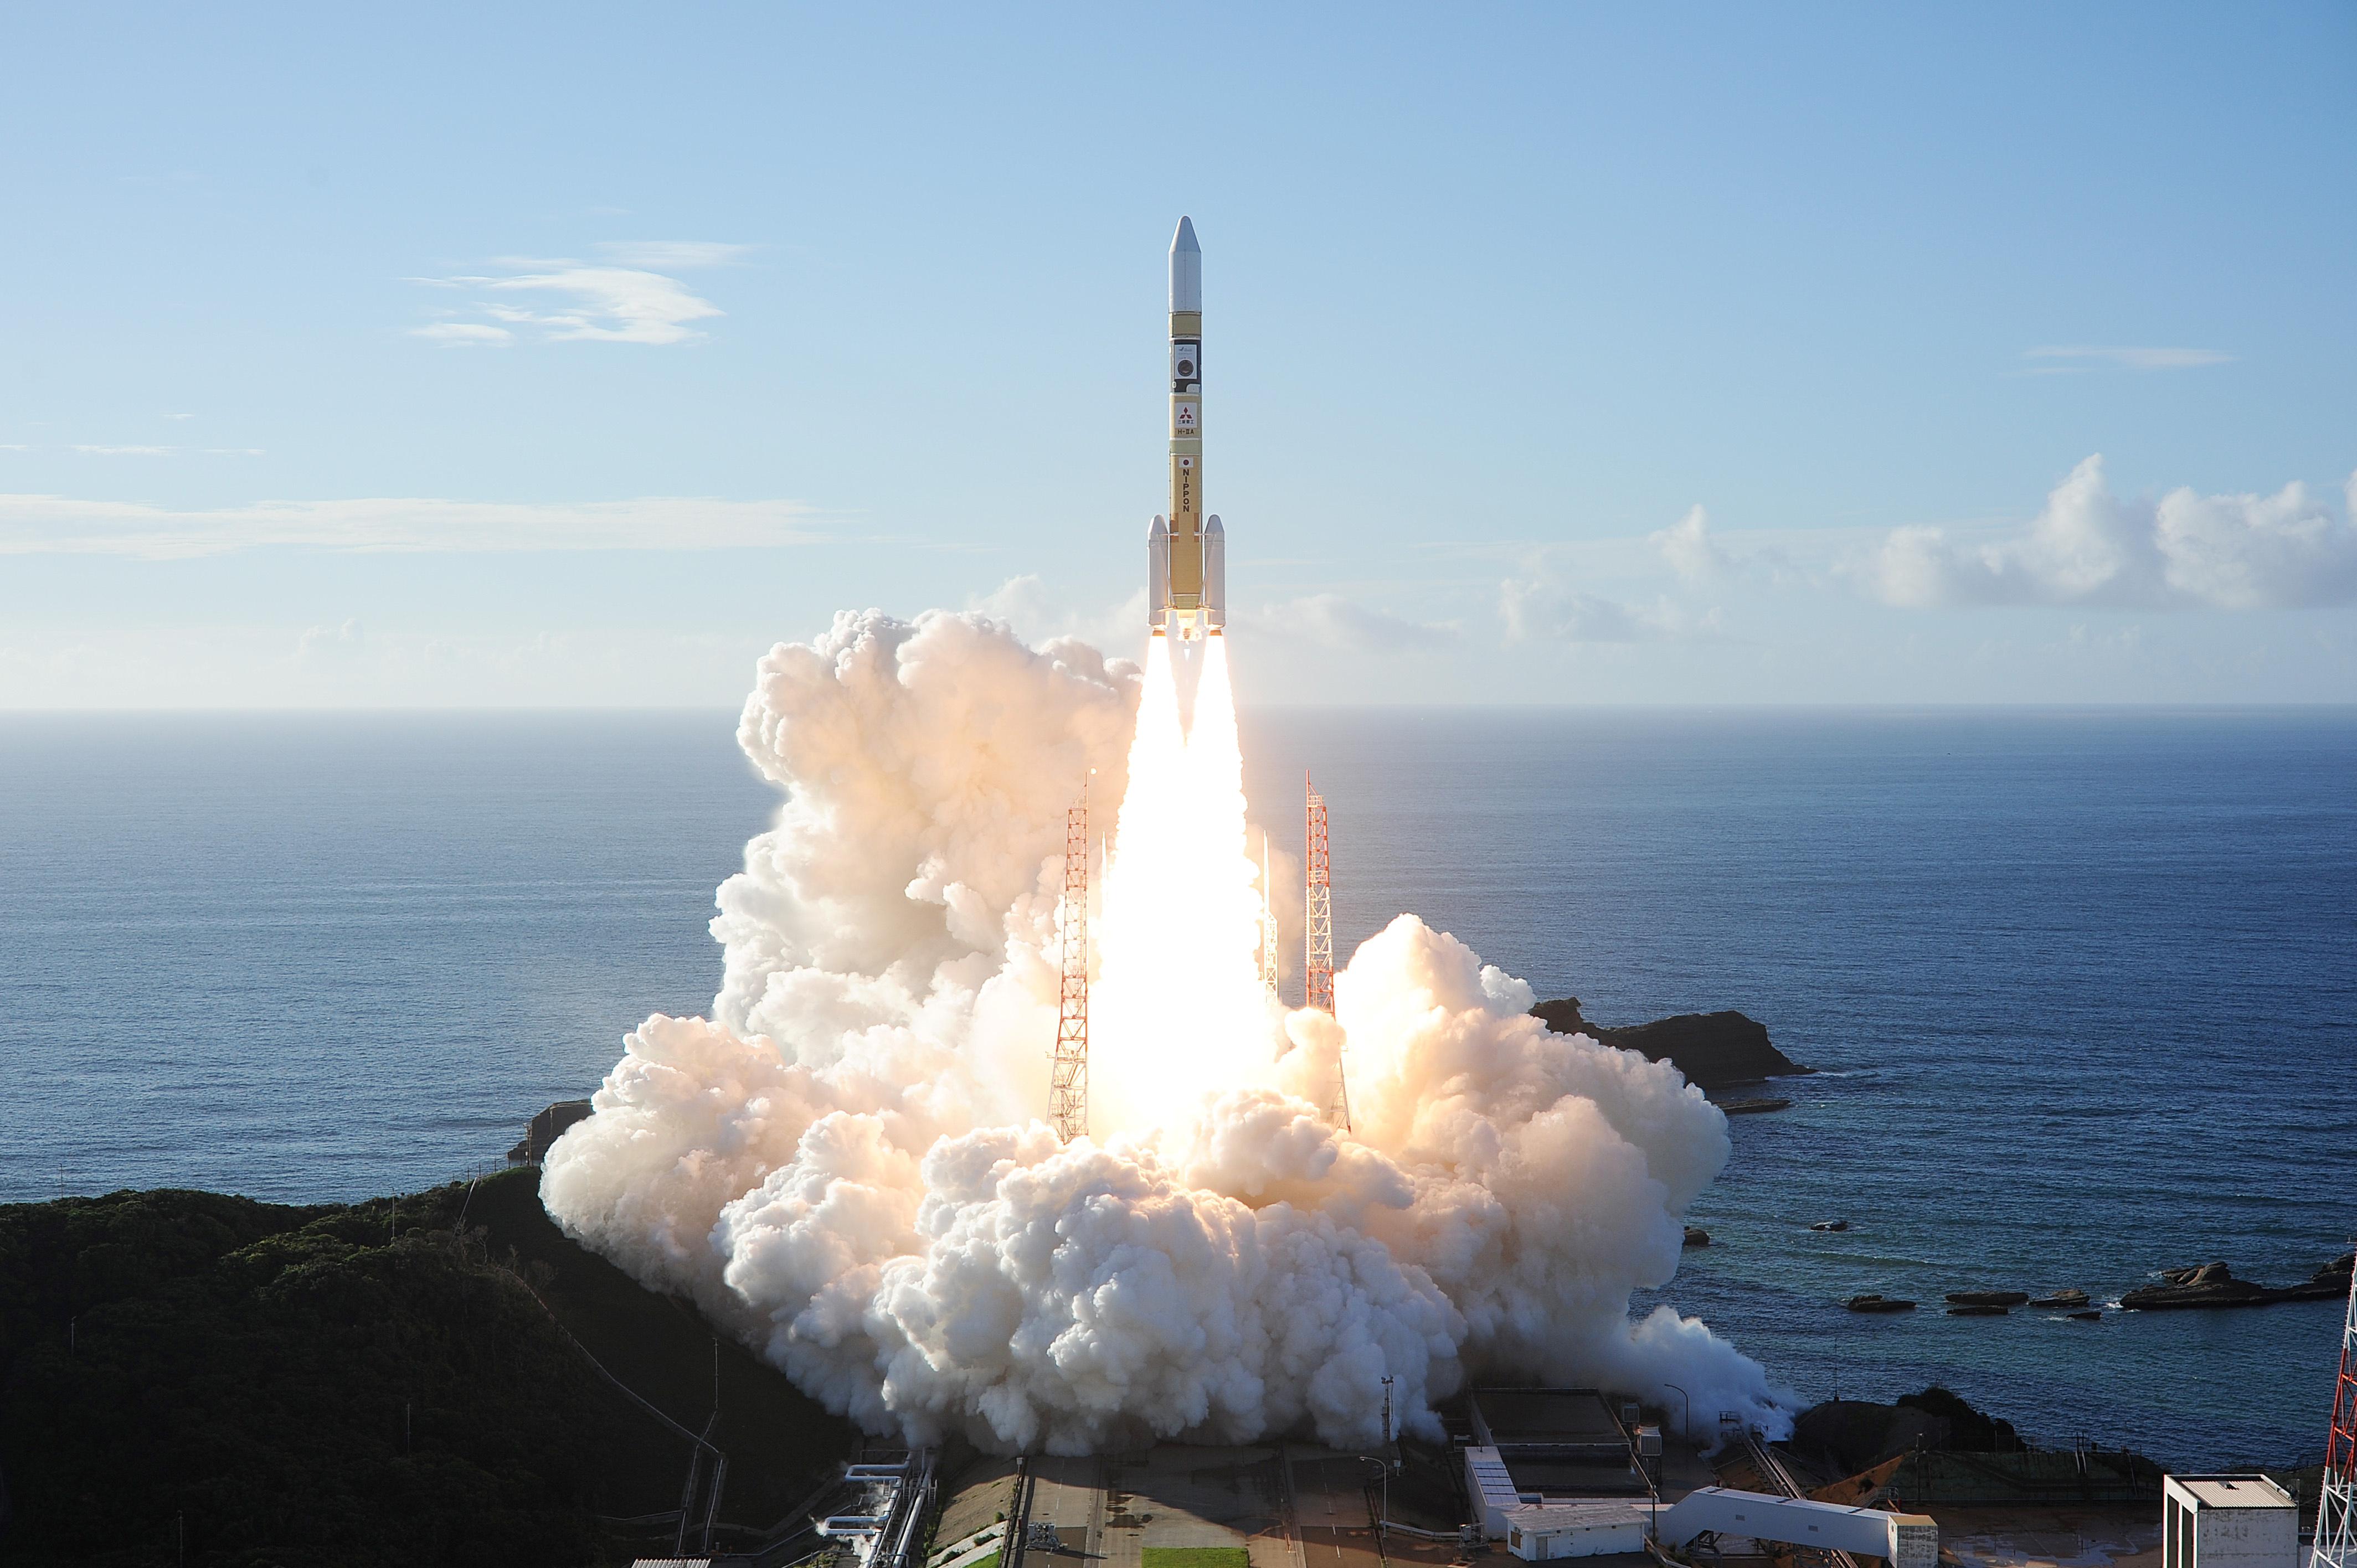 an h 2a rocket carrying the hope probe developed by the mohammed bin rashid space centre mbrsc in the united arab emirates uae for the mars explore lifts off from the launching pad at tanegashima space center on the southwestern island of tanegashima japan in this photo taken by kyodo july 20 2020 photo reuters